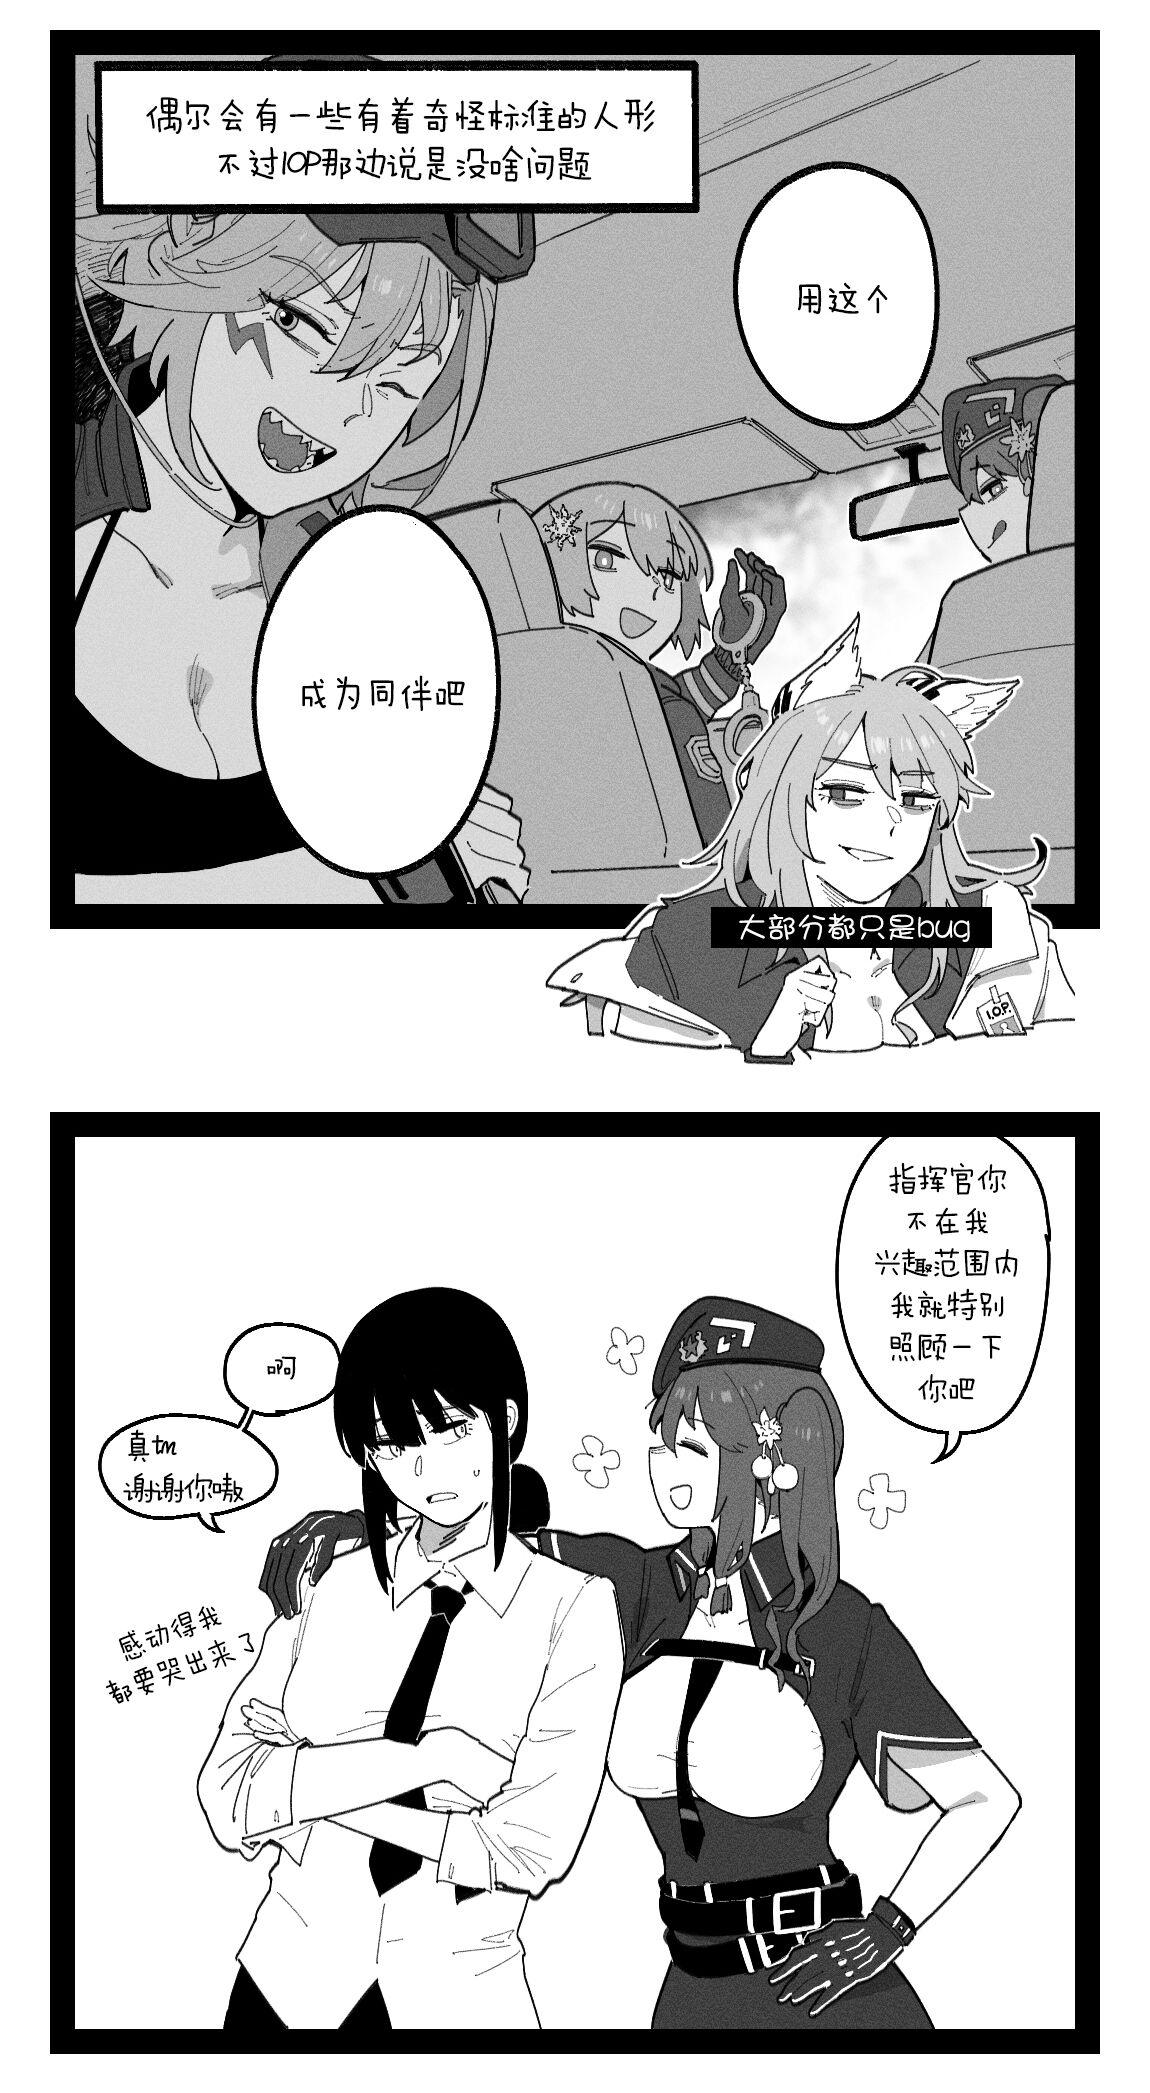  Griffin Commanders - Girls frontline Cum On Face - Page 7